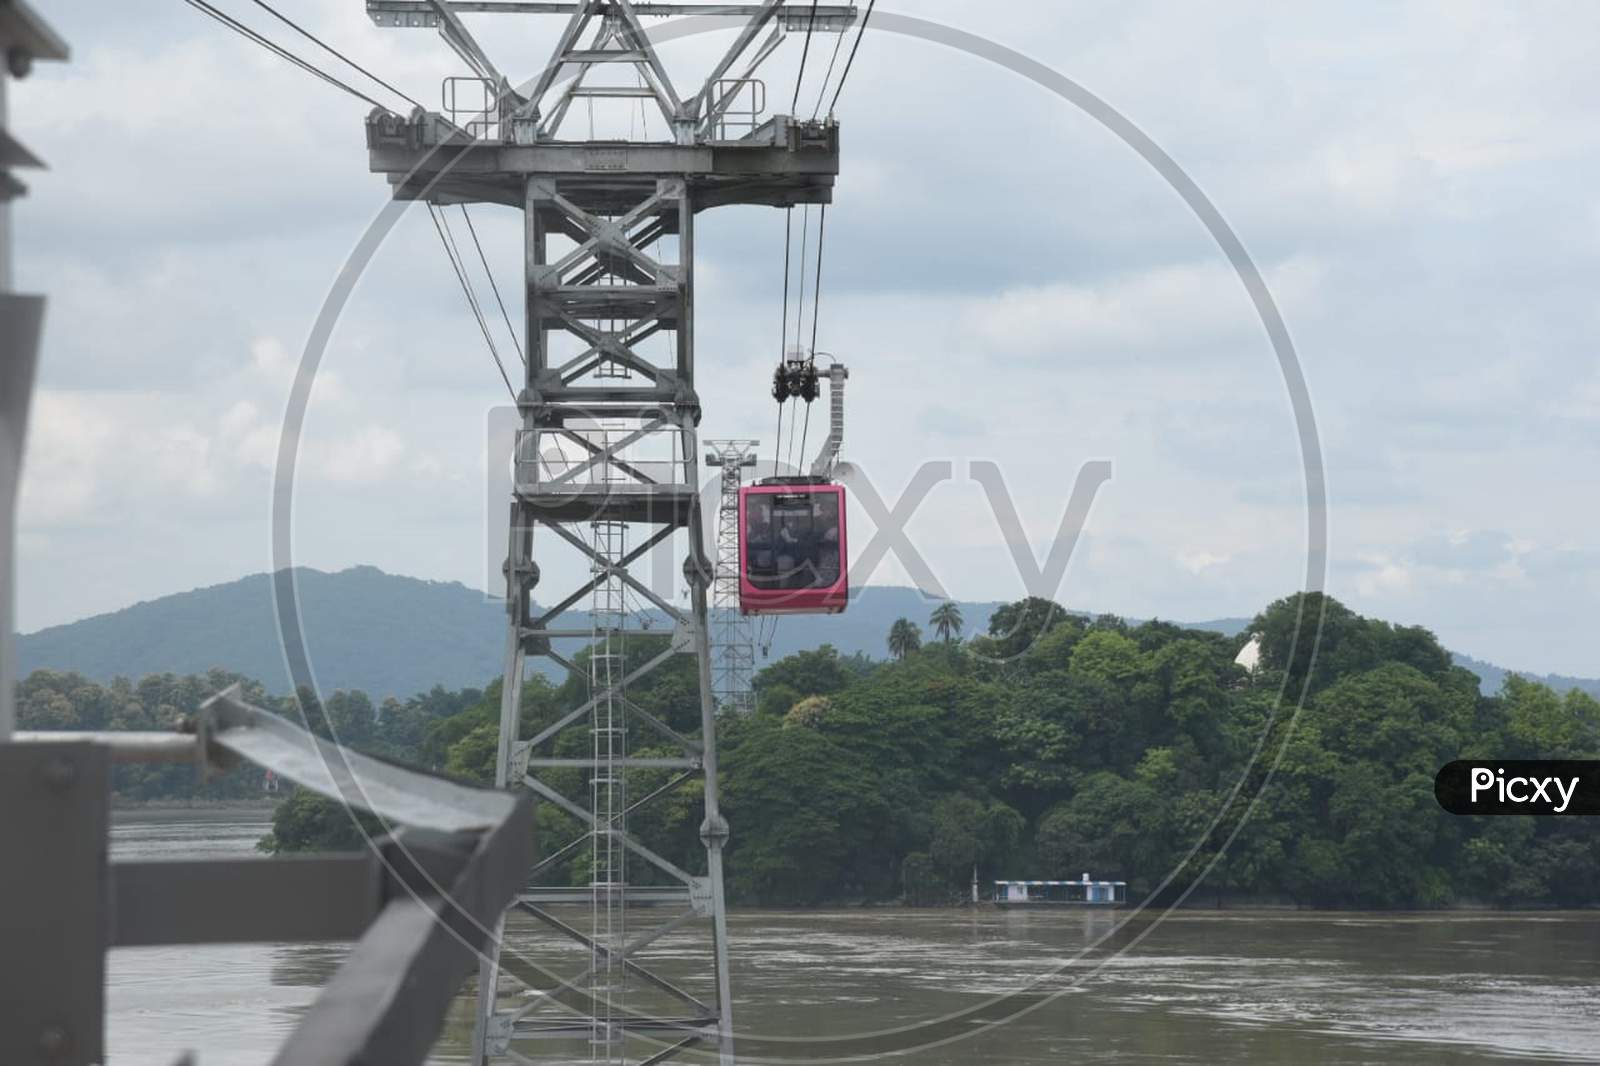 People Travel In Cable Car Cabins In India'S Longest River Ropeway Over The River Brahmaputra, In Guwahati On August 24, 2020.